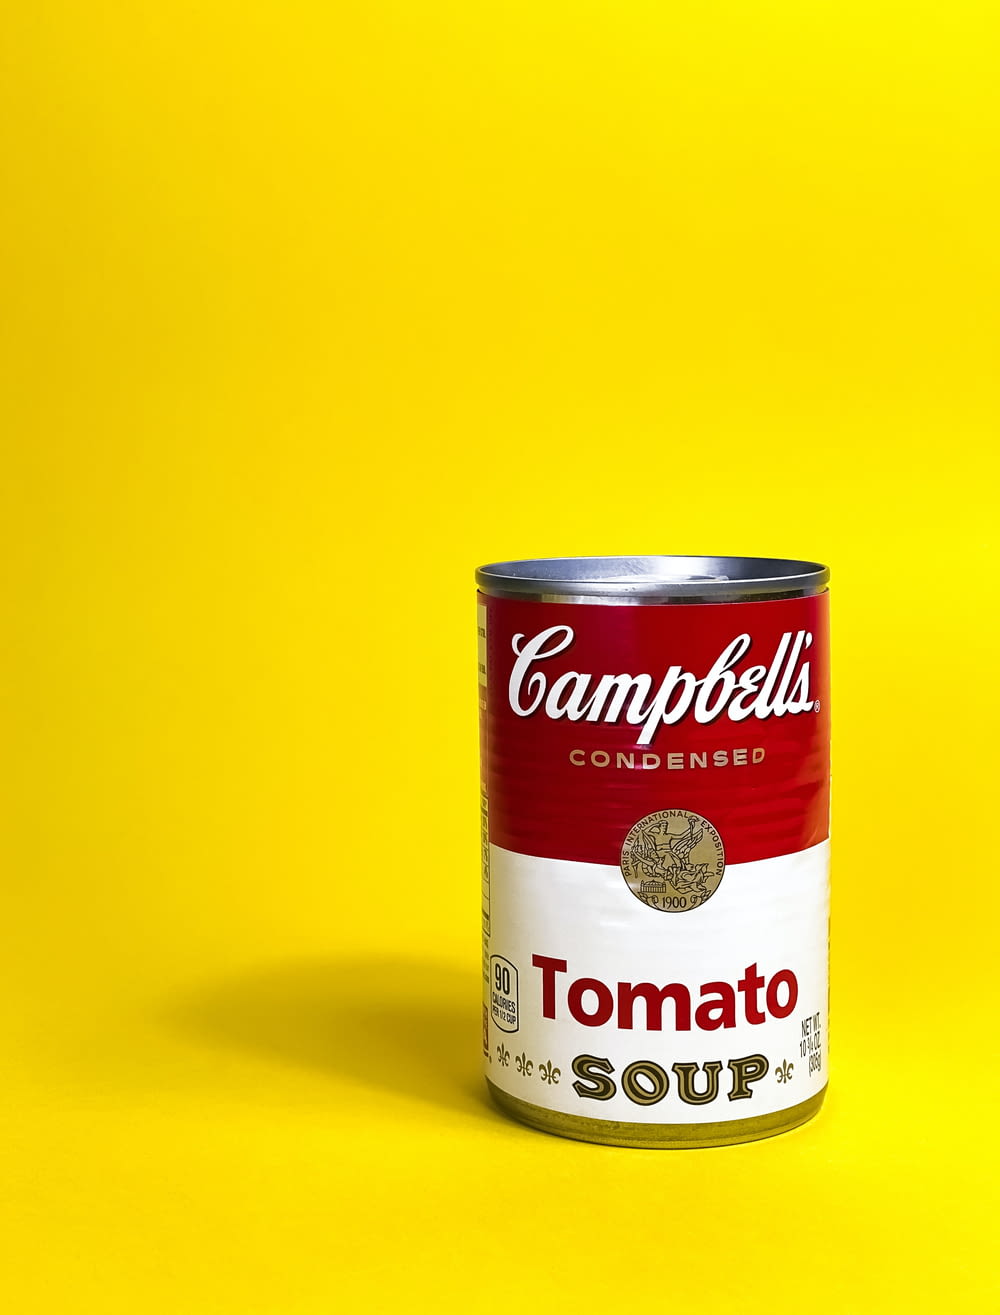 a can of soup on a yellow background